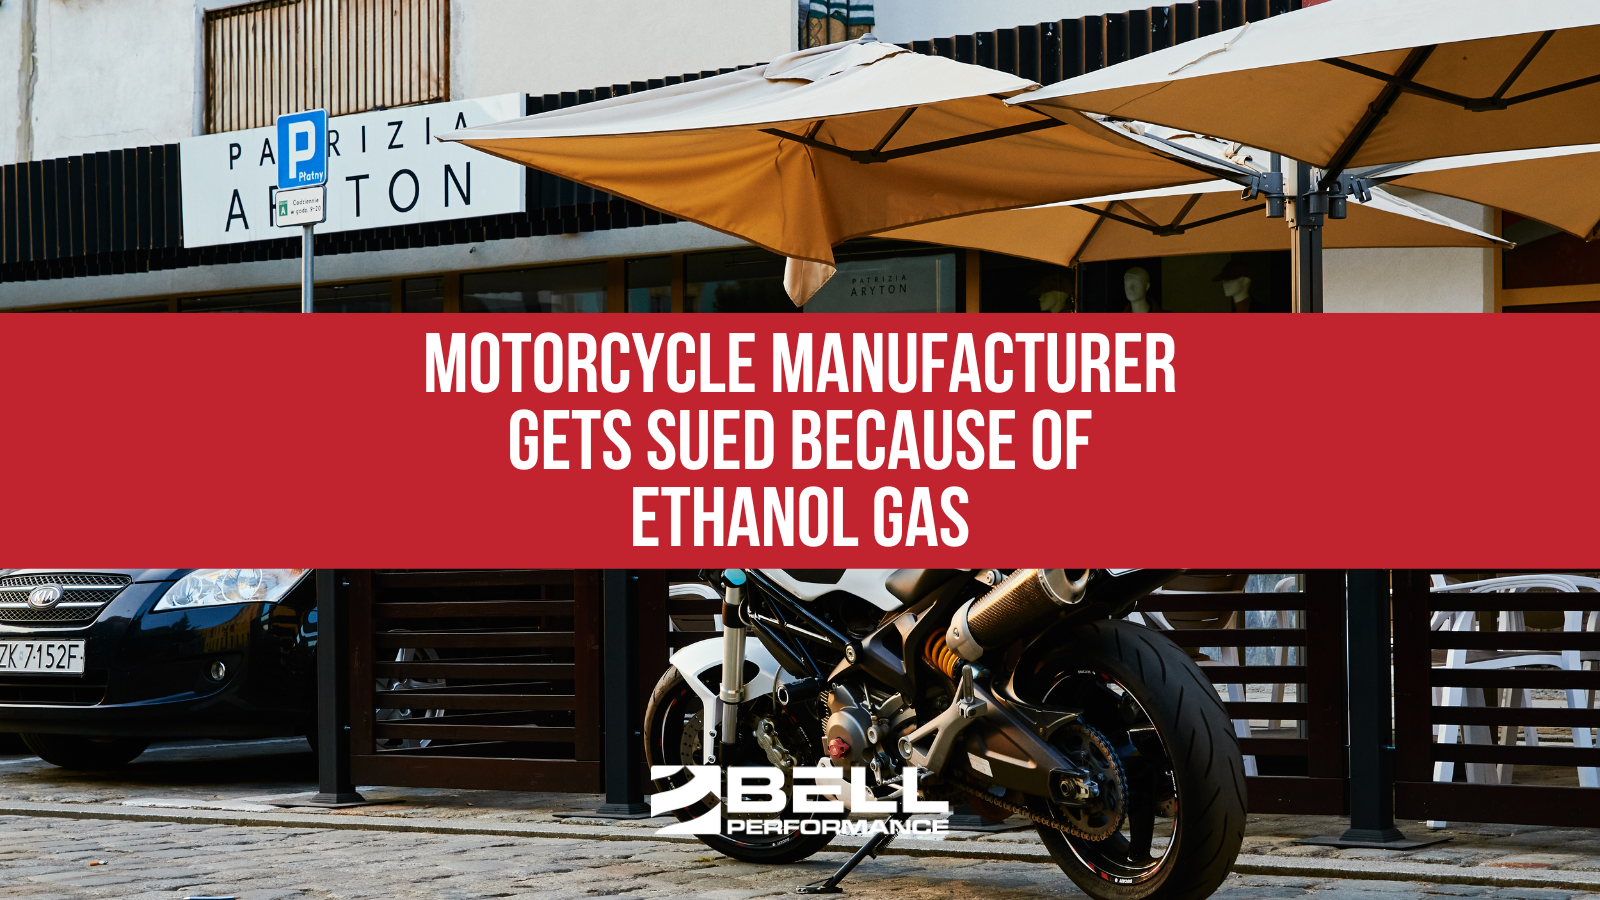 Motorcycle Manufacturer Gets Sued Because of Ethanol Gas